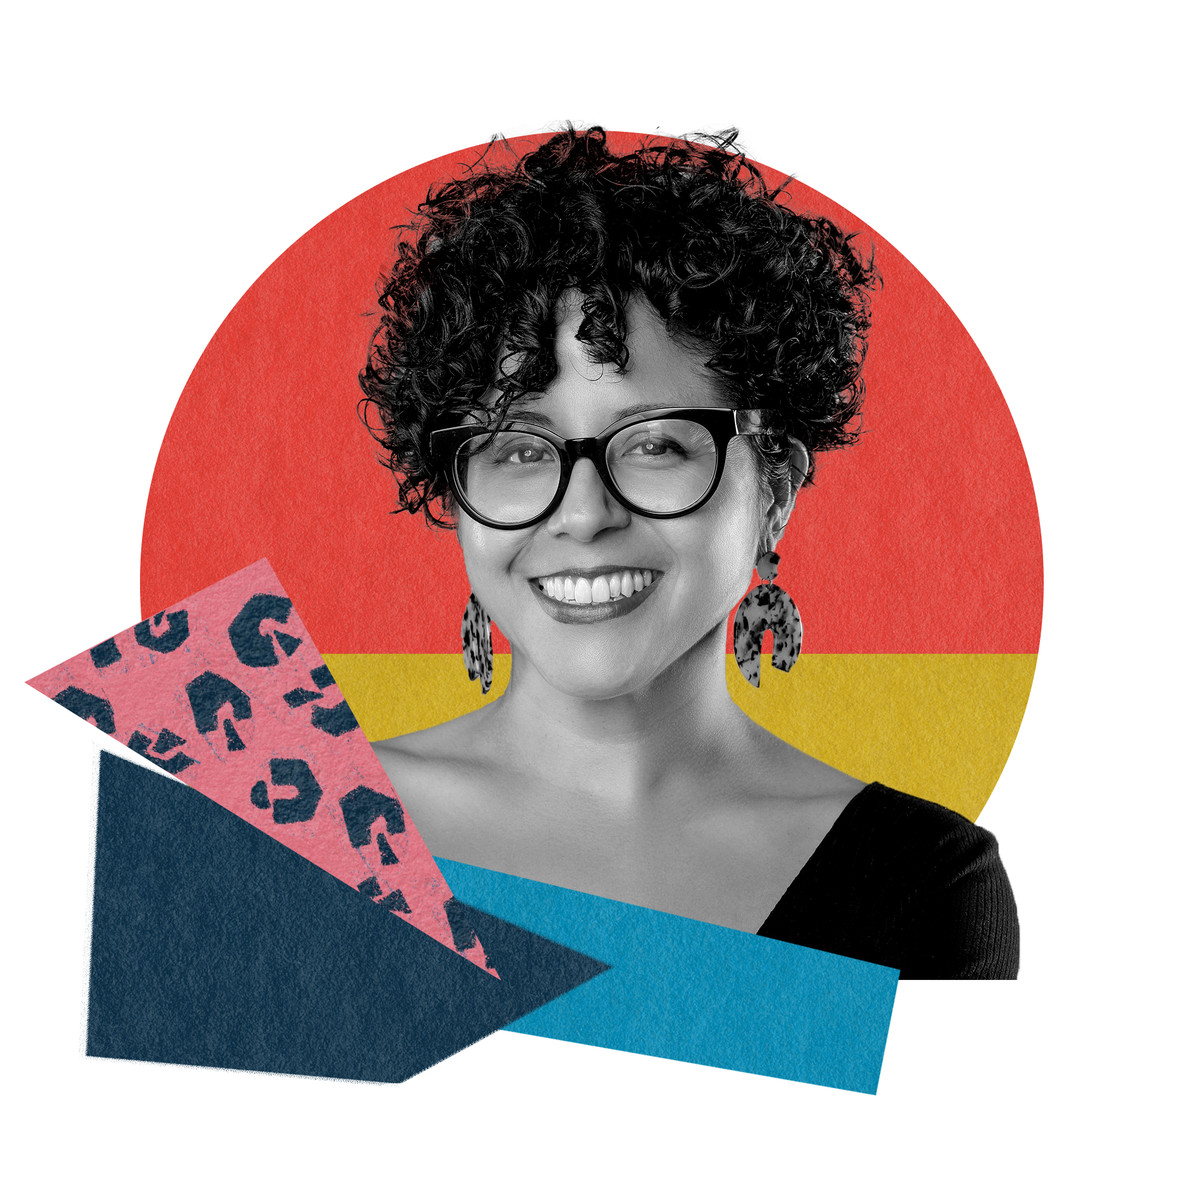 A black and white photo of the artist, who has curly natural hair, large black glasses, and dangling earrings. 